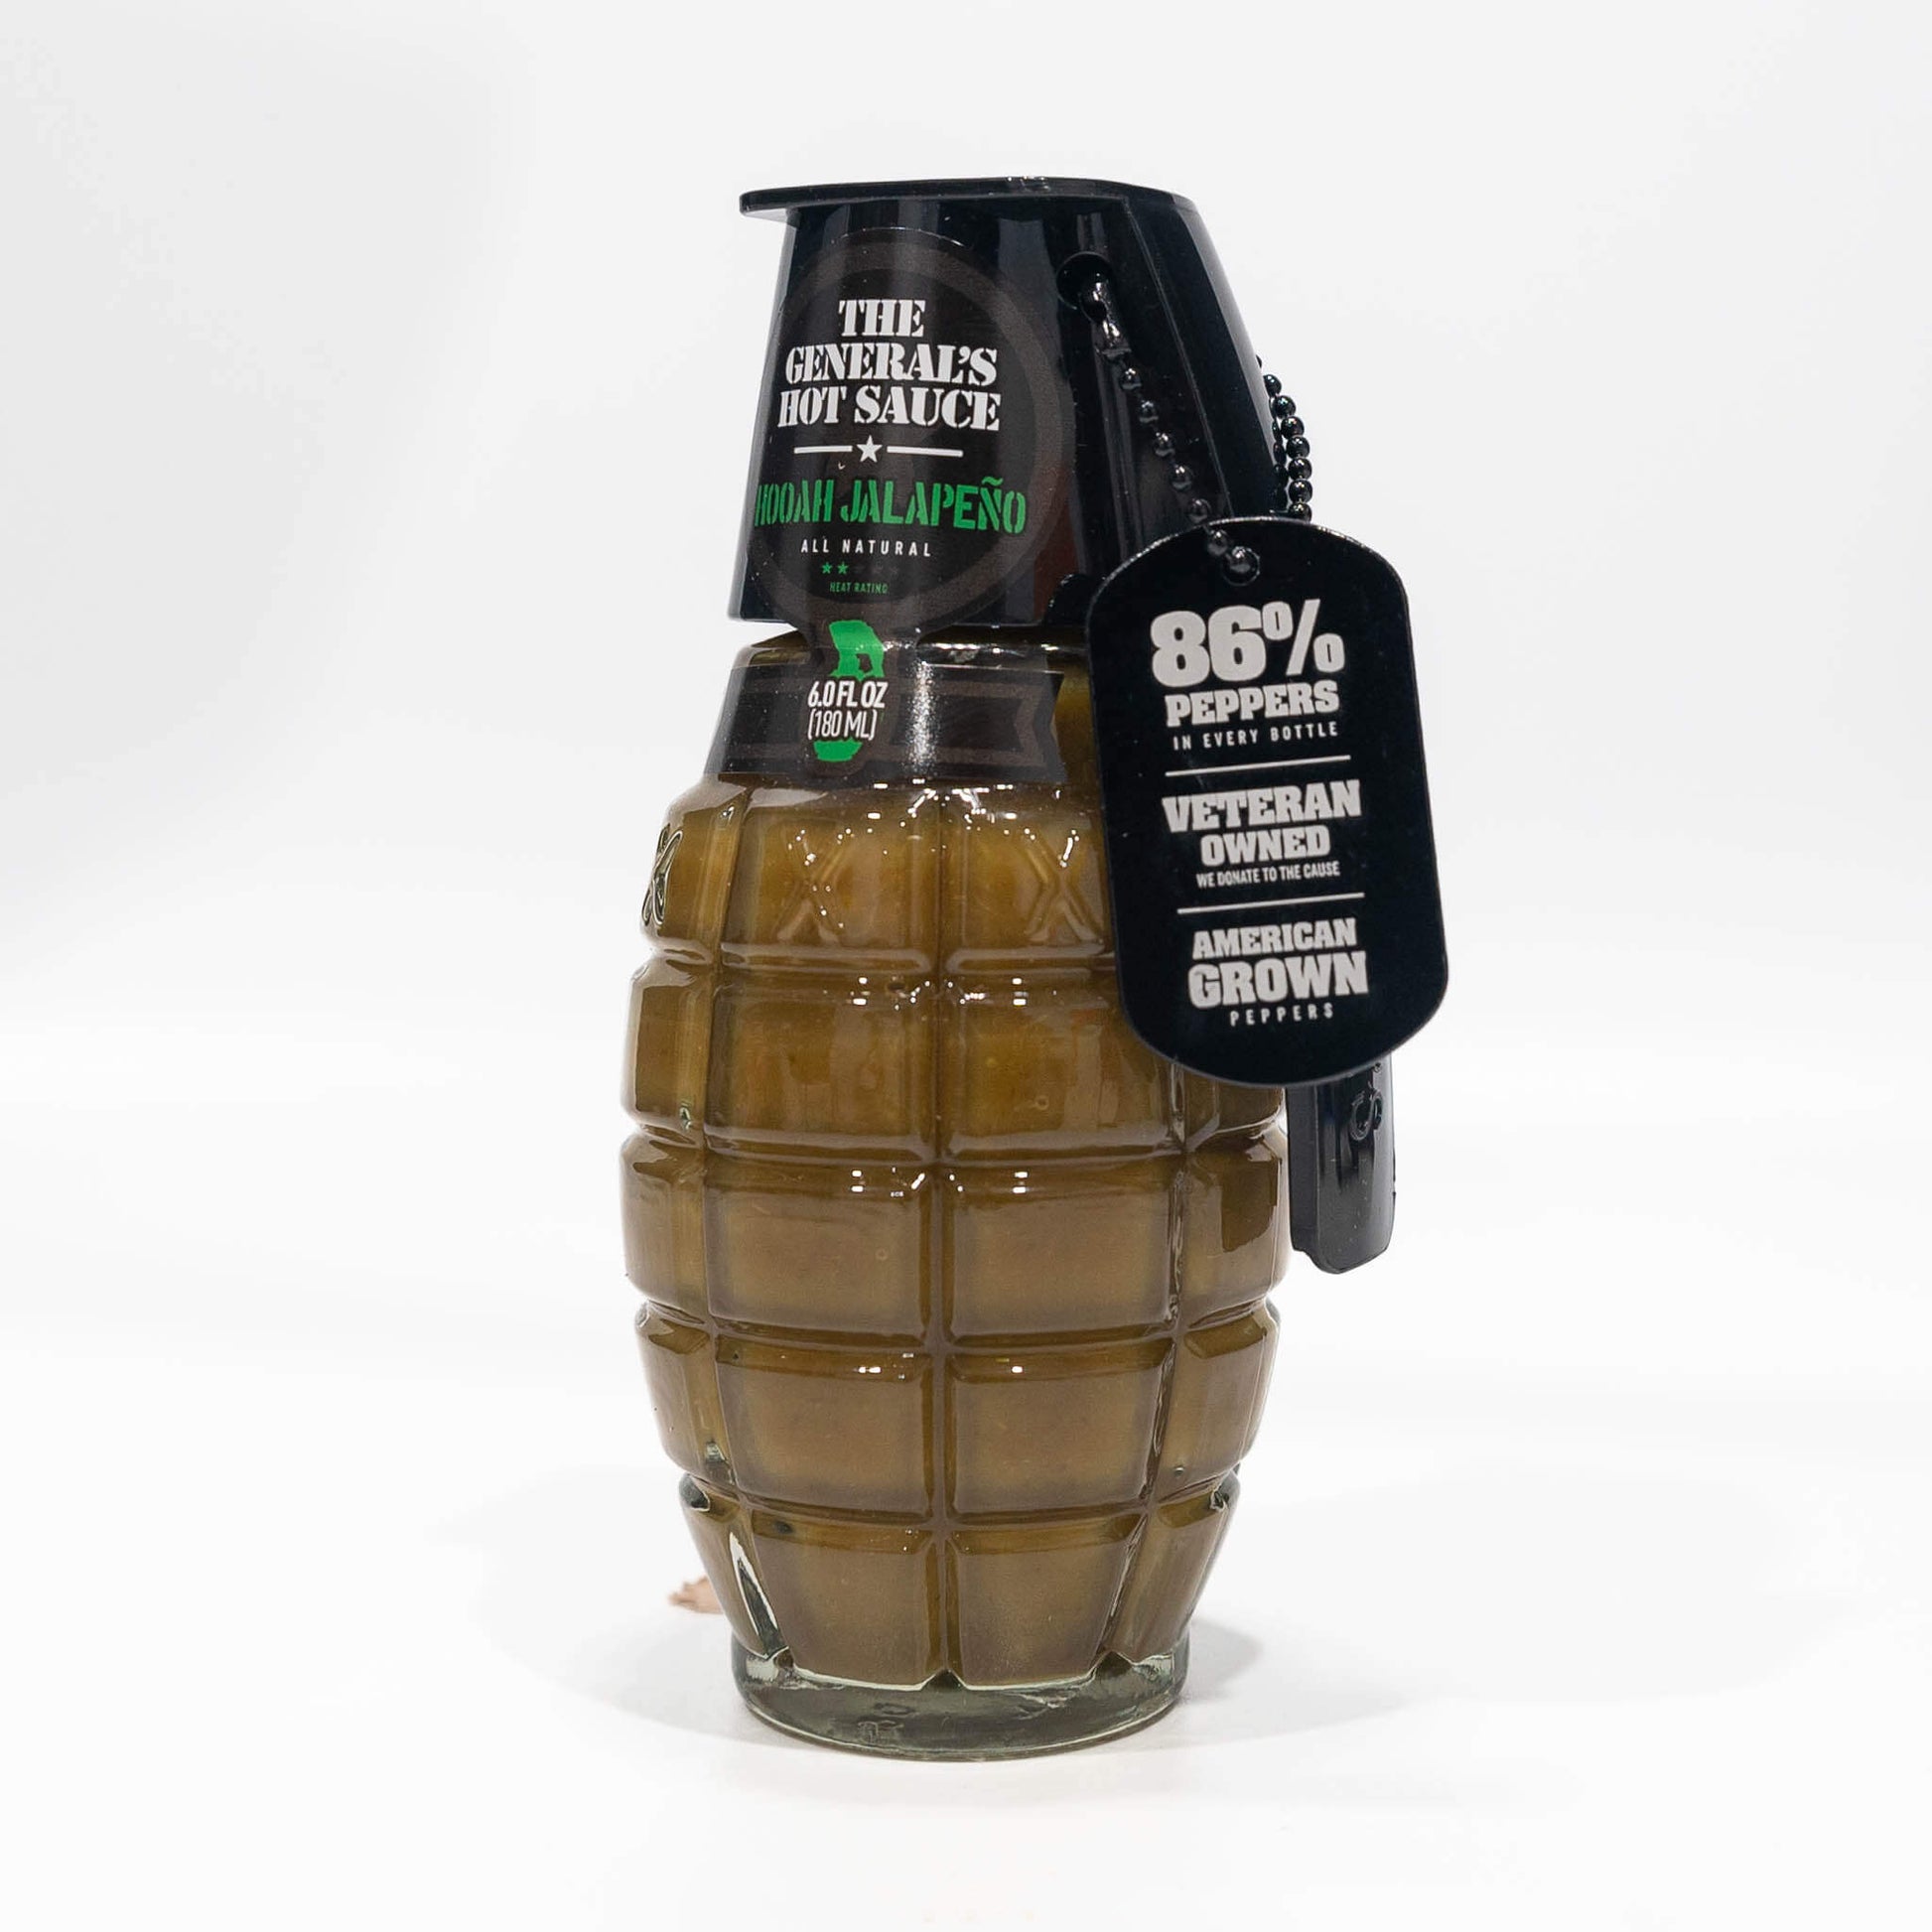 Front angle view of The General's Hooah Jalapeño hot sauce bottle, showcasing the 'All Natural' label and 86% peppers content, emphasizing its veteran-owned and American-grown quality.